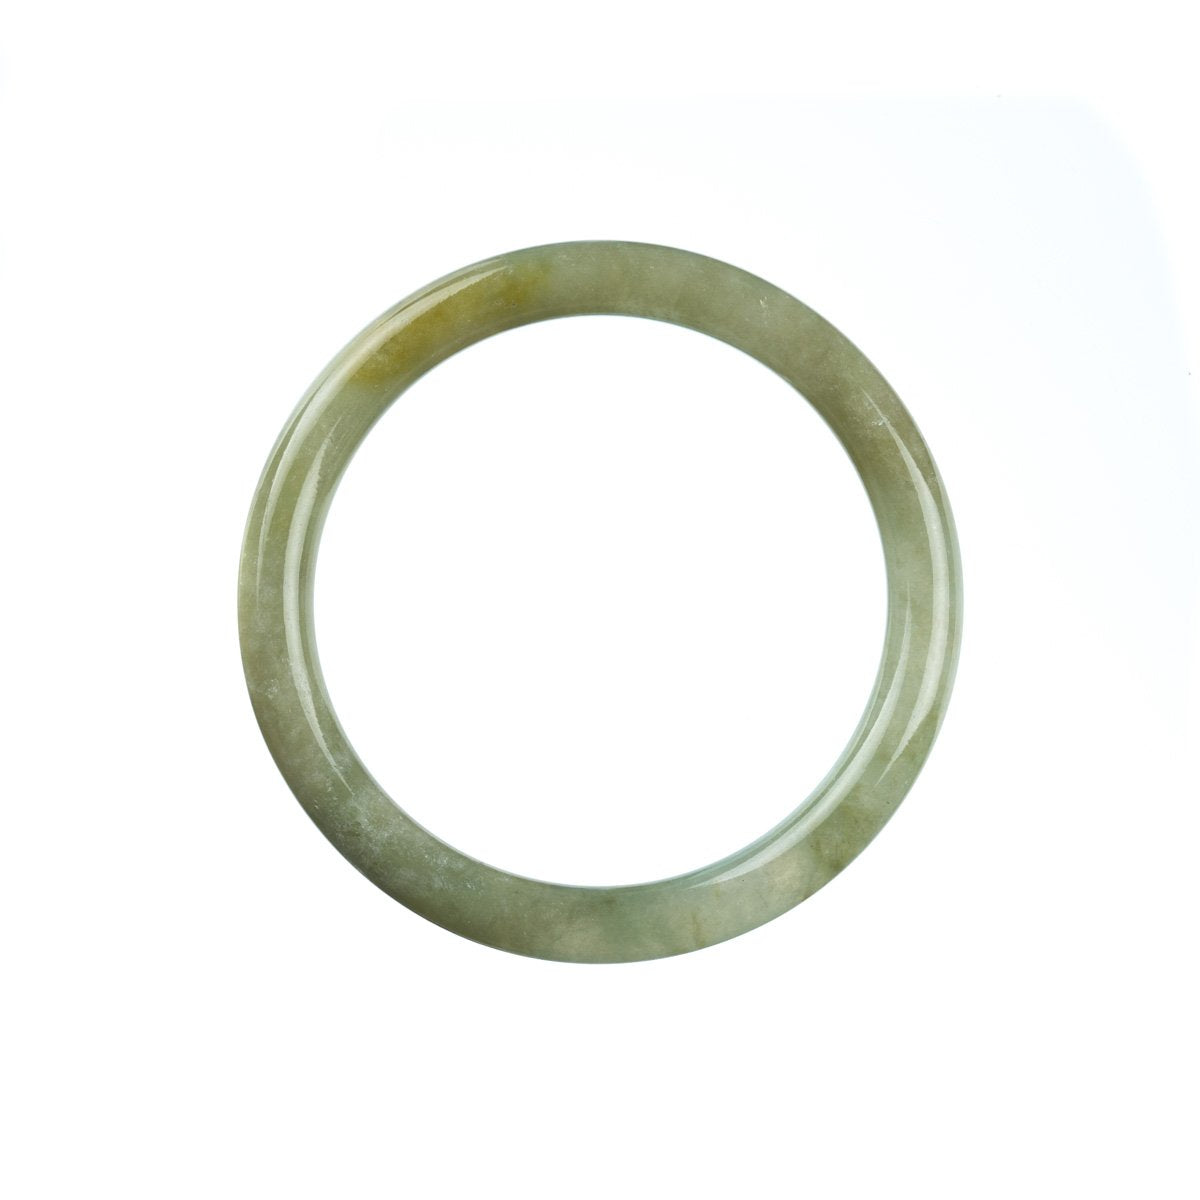 A round 55mm certified Grade A Green Jadeite Jade bangle by MAYS™.